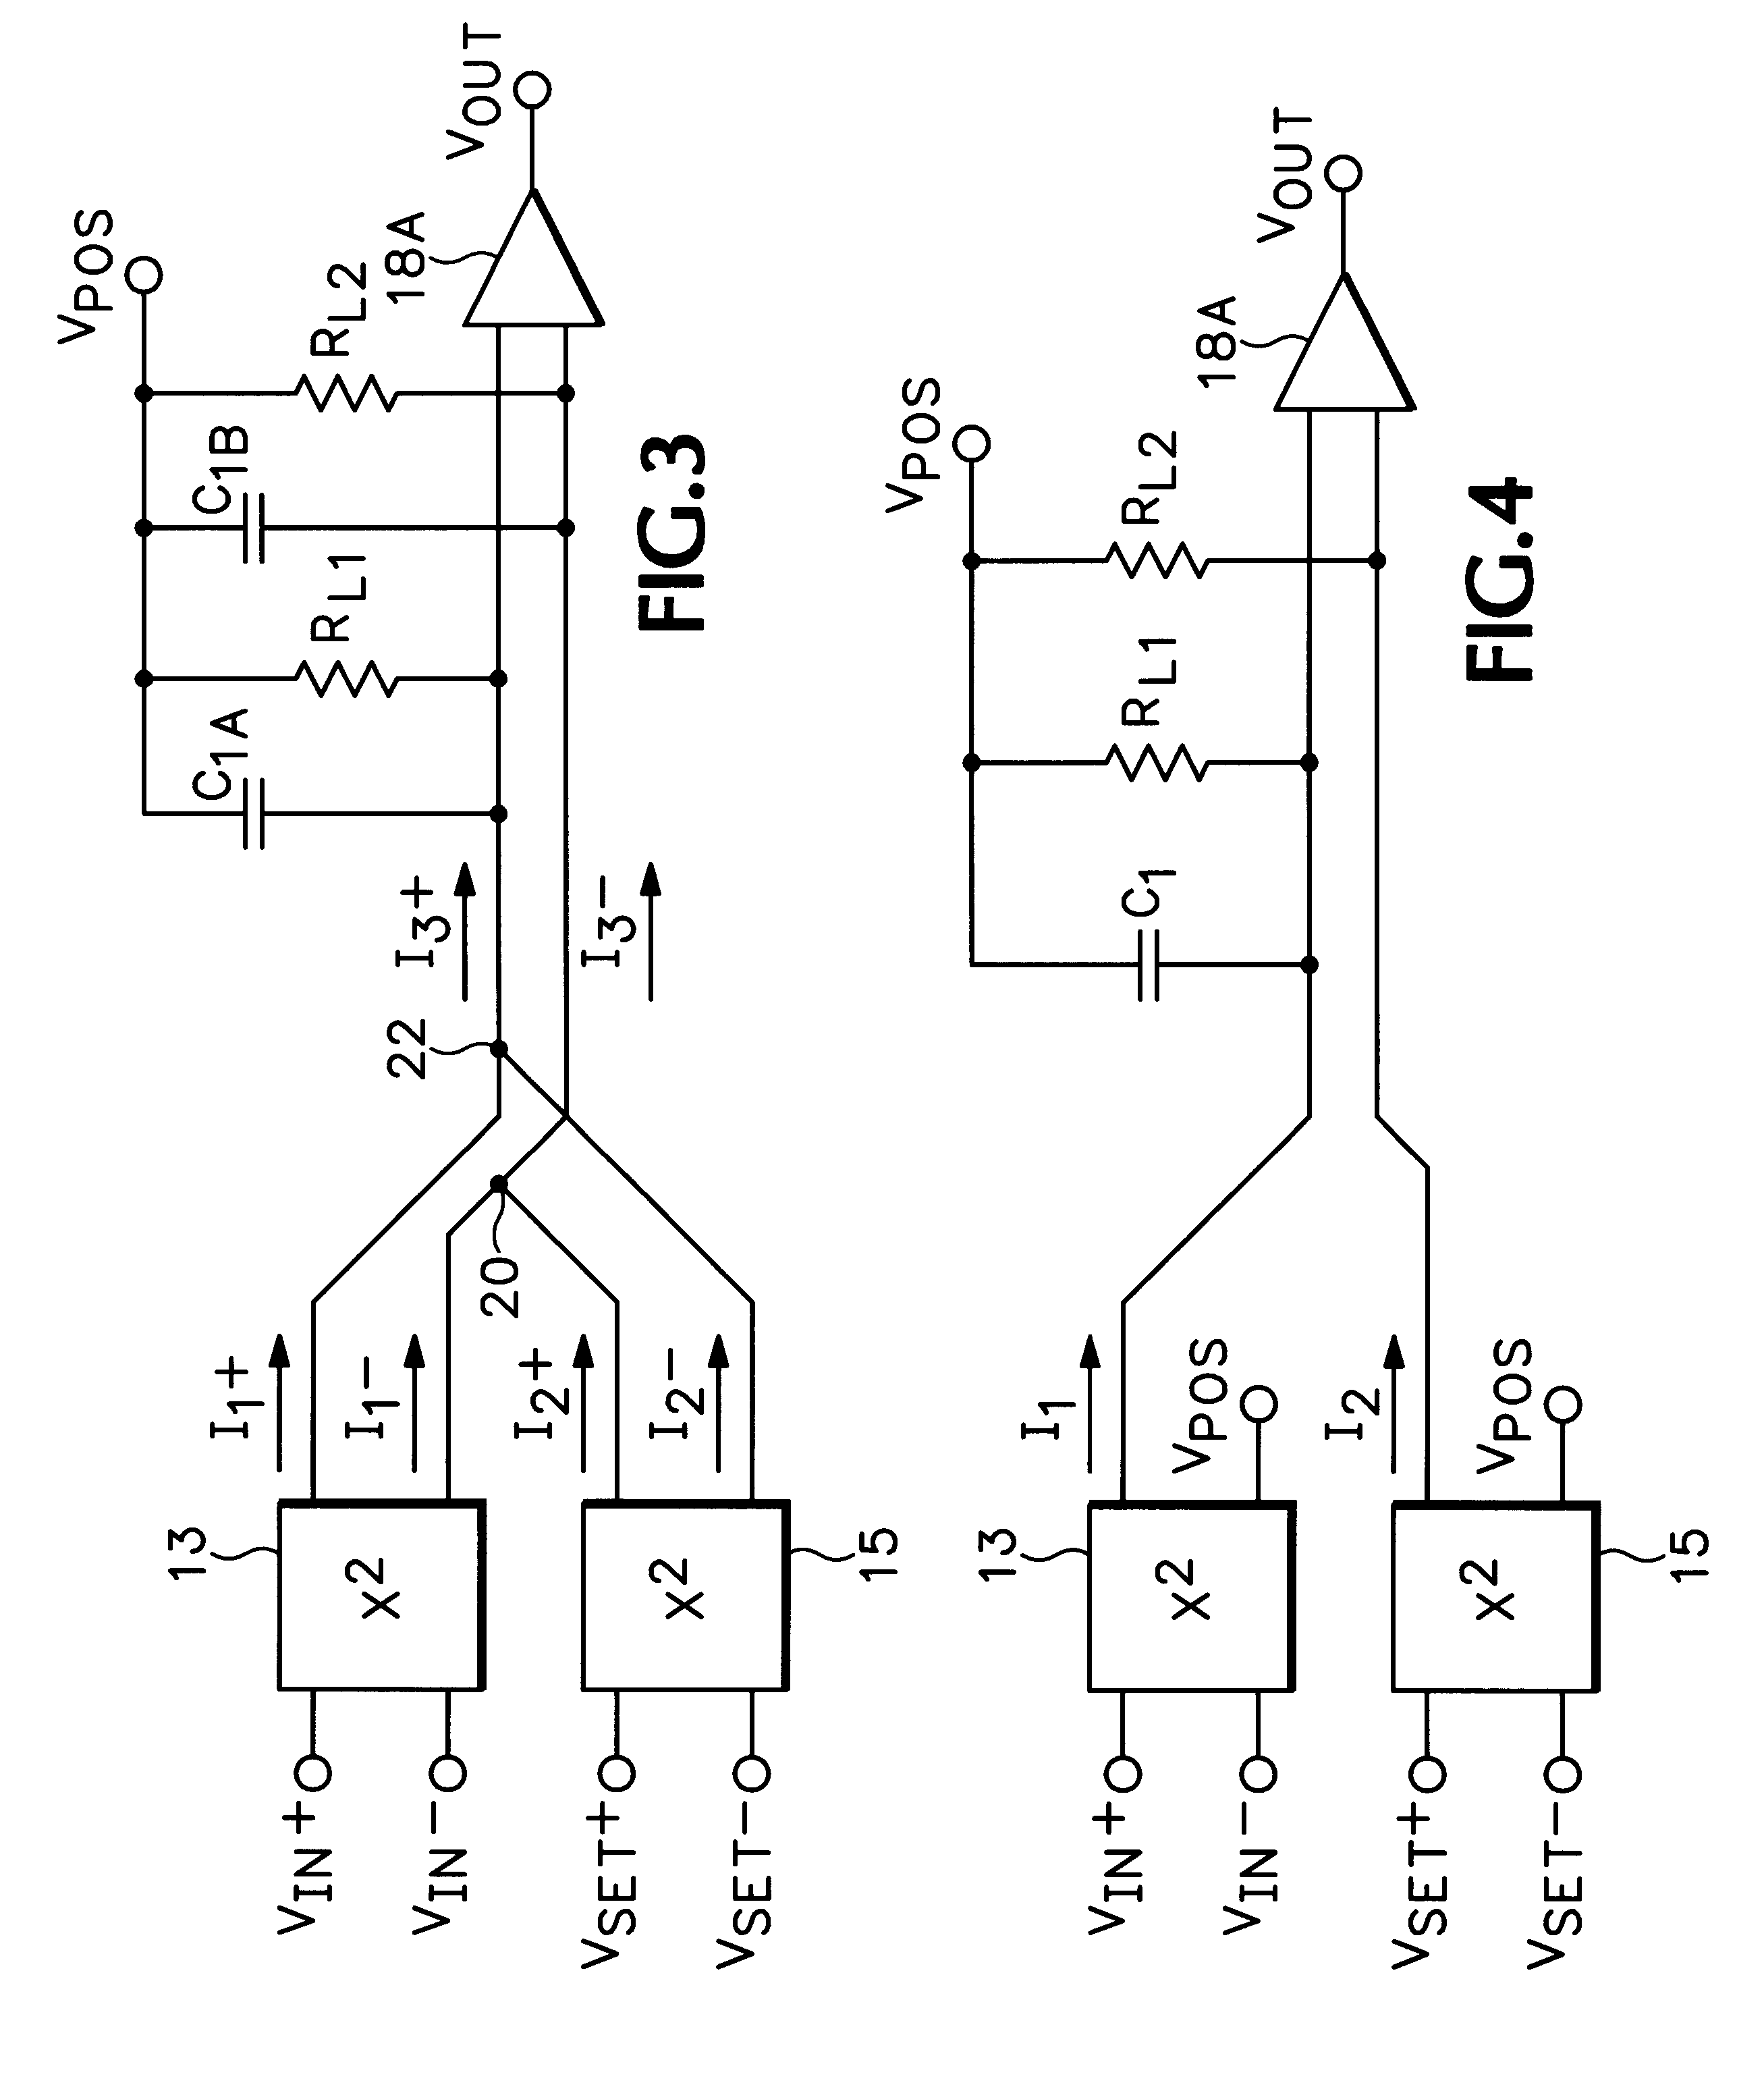 RMS-to-DC converter with balanced multi-tanh triplet squaring cells